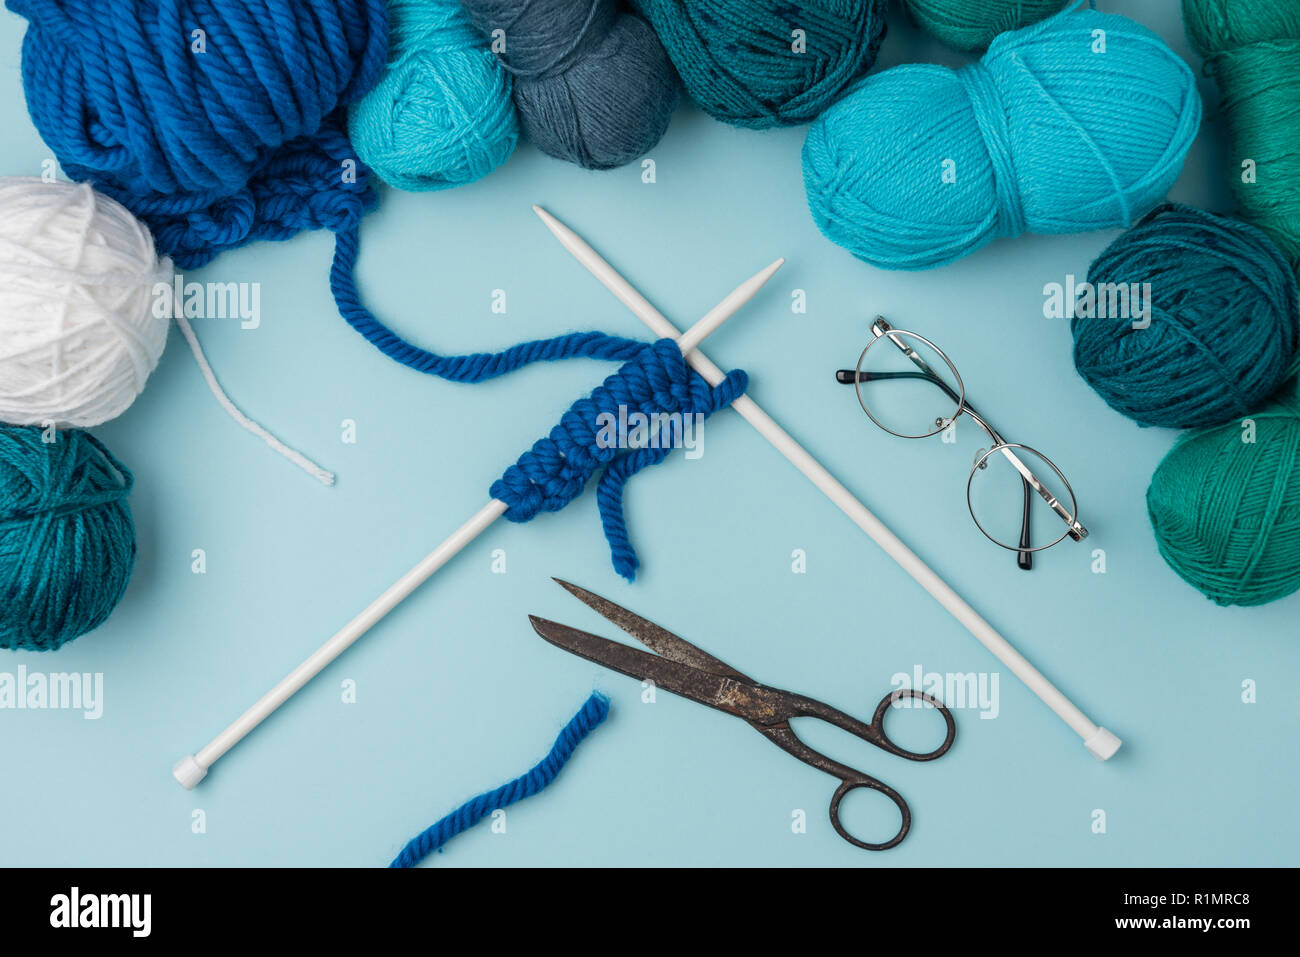 close up view of yarn, knitting needles, eyeglasses and scissors on blue backdrop Stock Photo